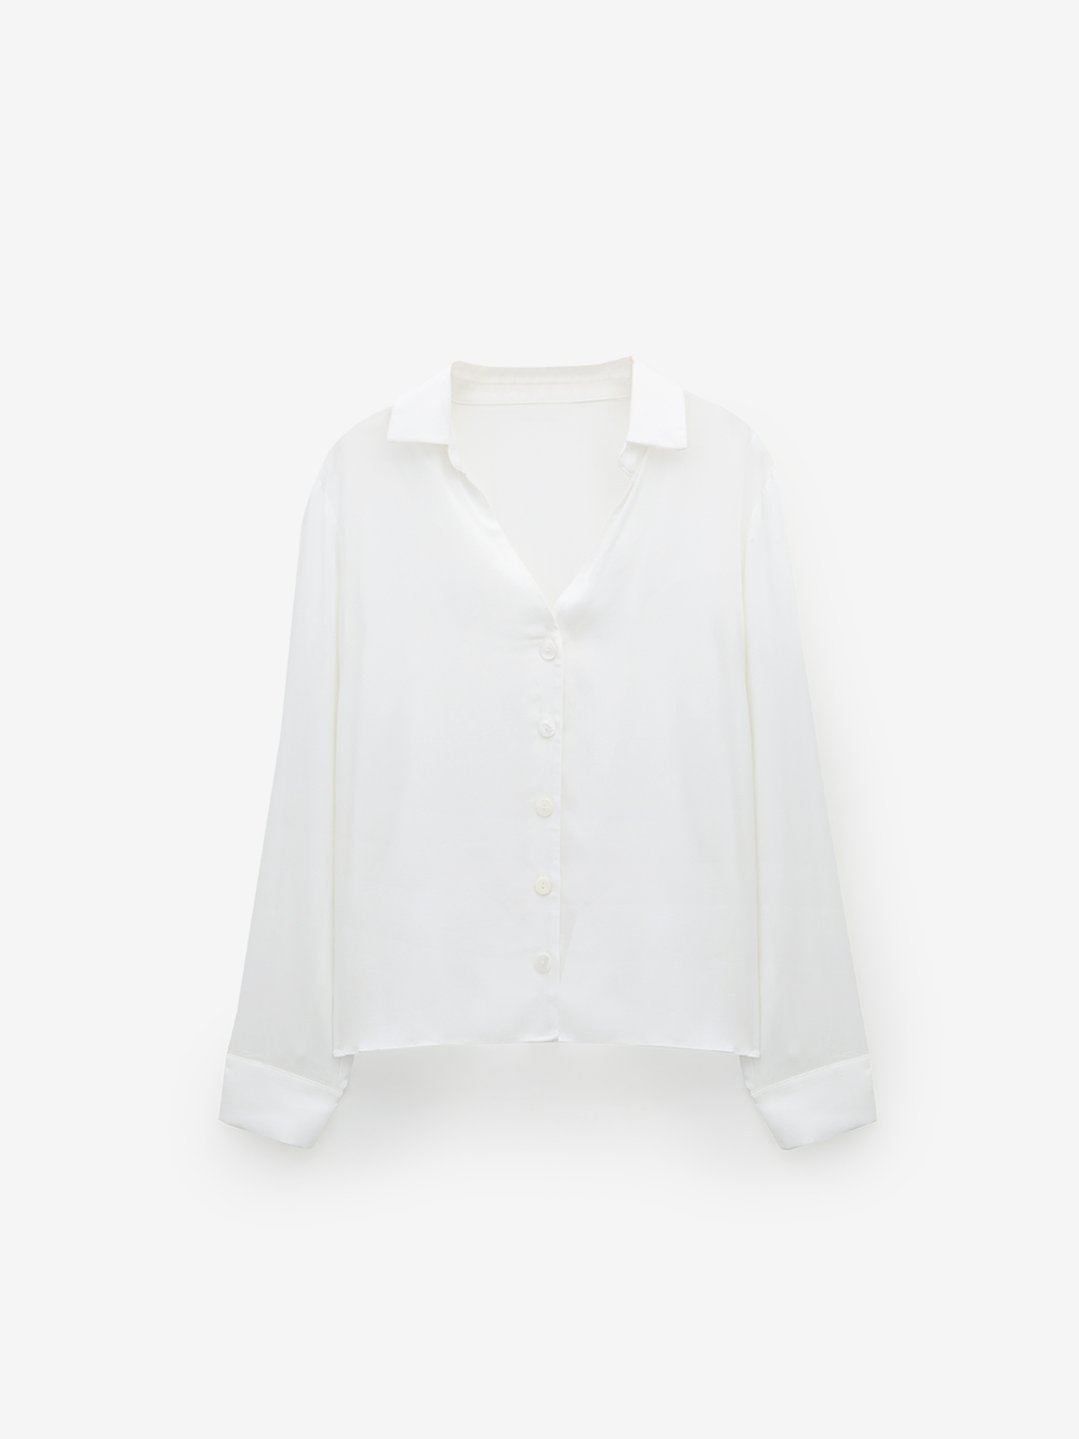 Sustainable Long Sleeve Button Down Shirt - White - Pomelo Fashion